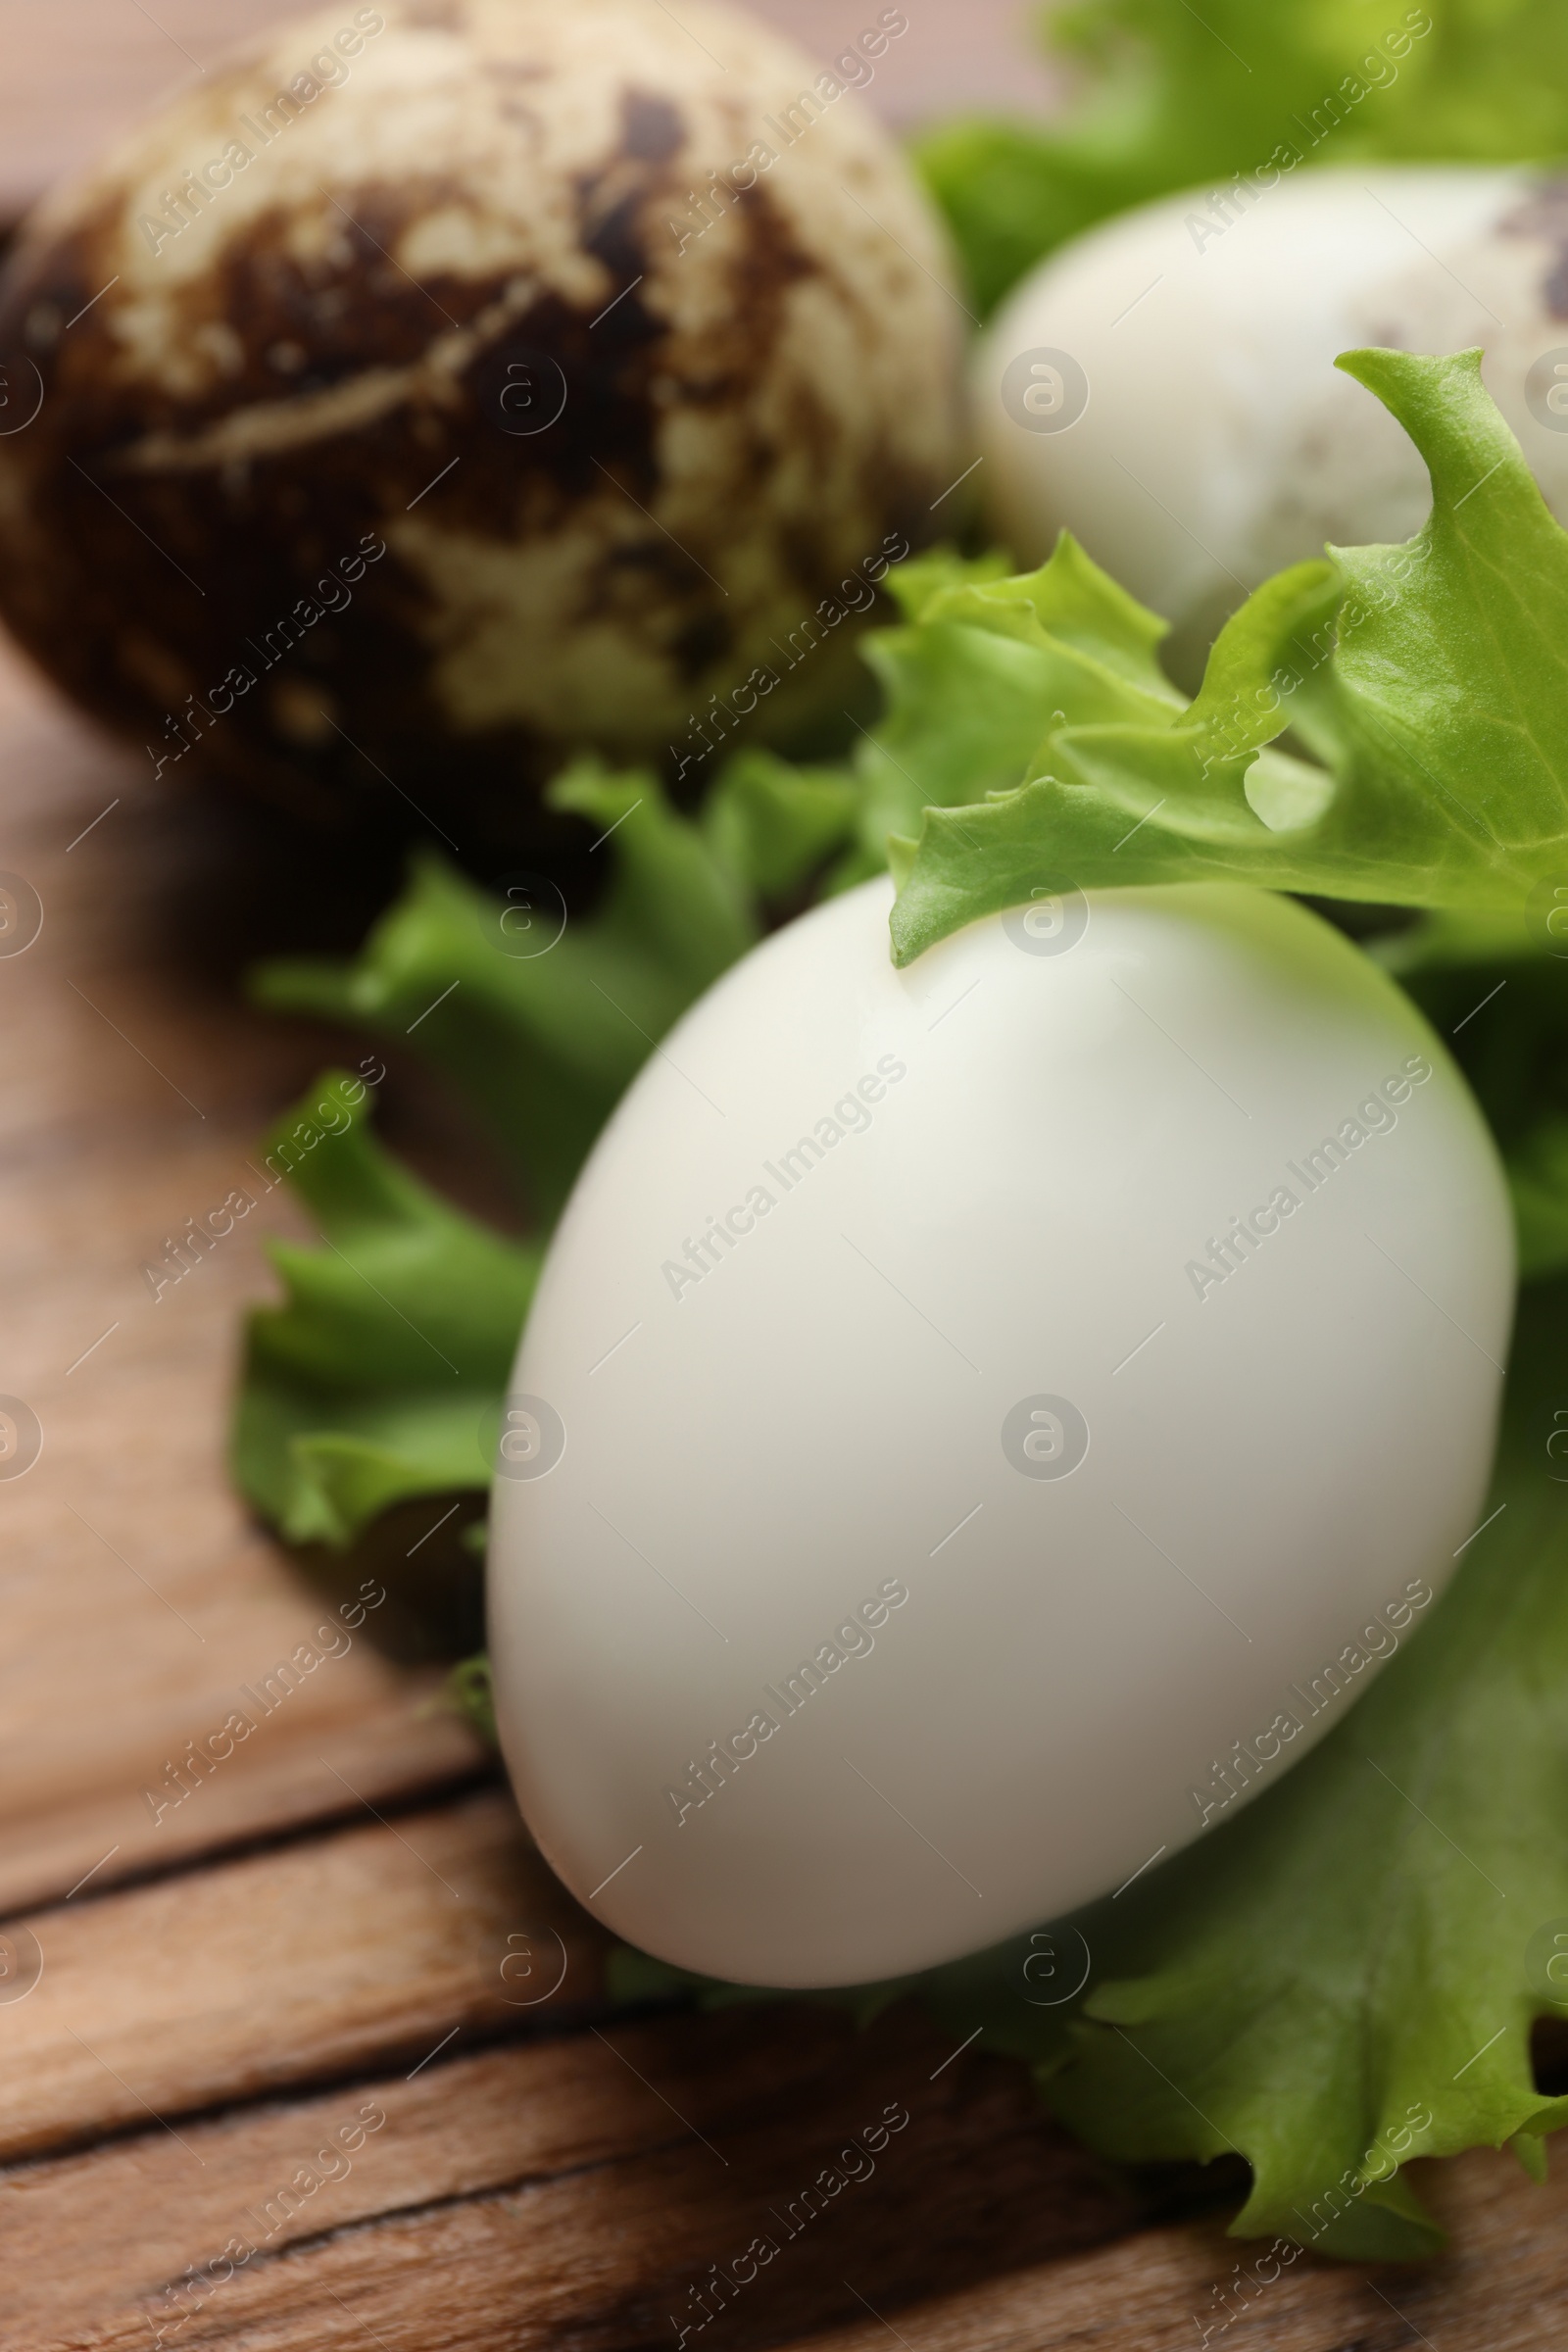 Photo of Unpeeled and peeled boiled quail eggs with lettuce on wooden table, closeup